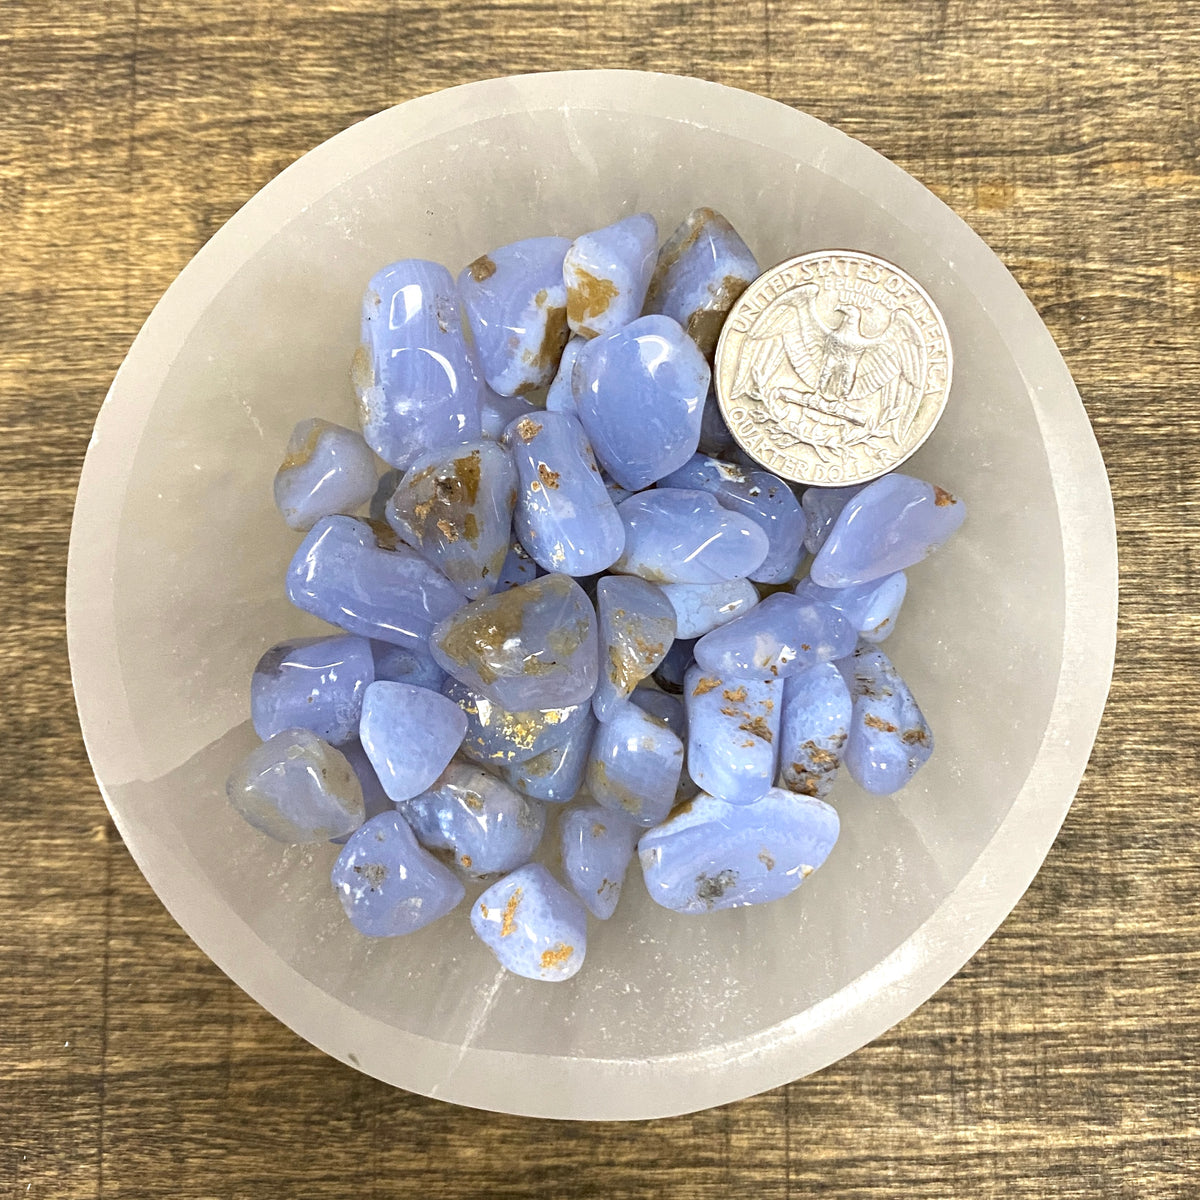 Overhead shot of various Blue Agate tumbled stones in a small bowl.